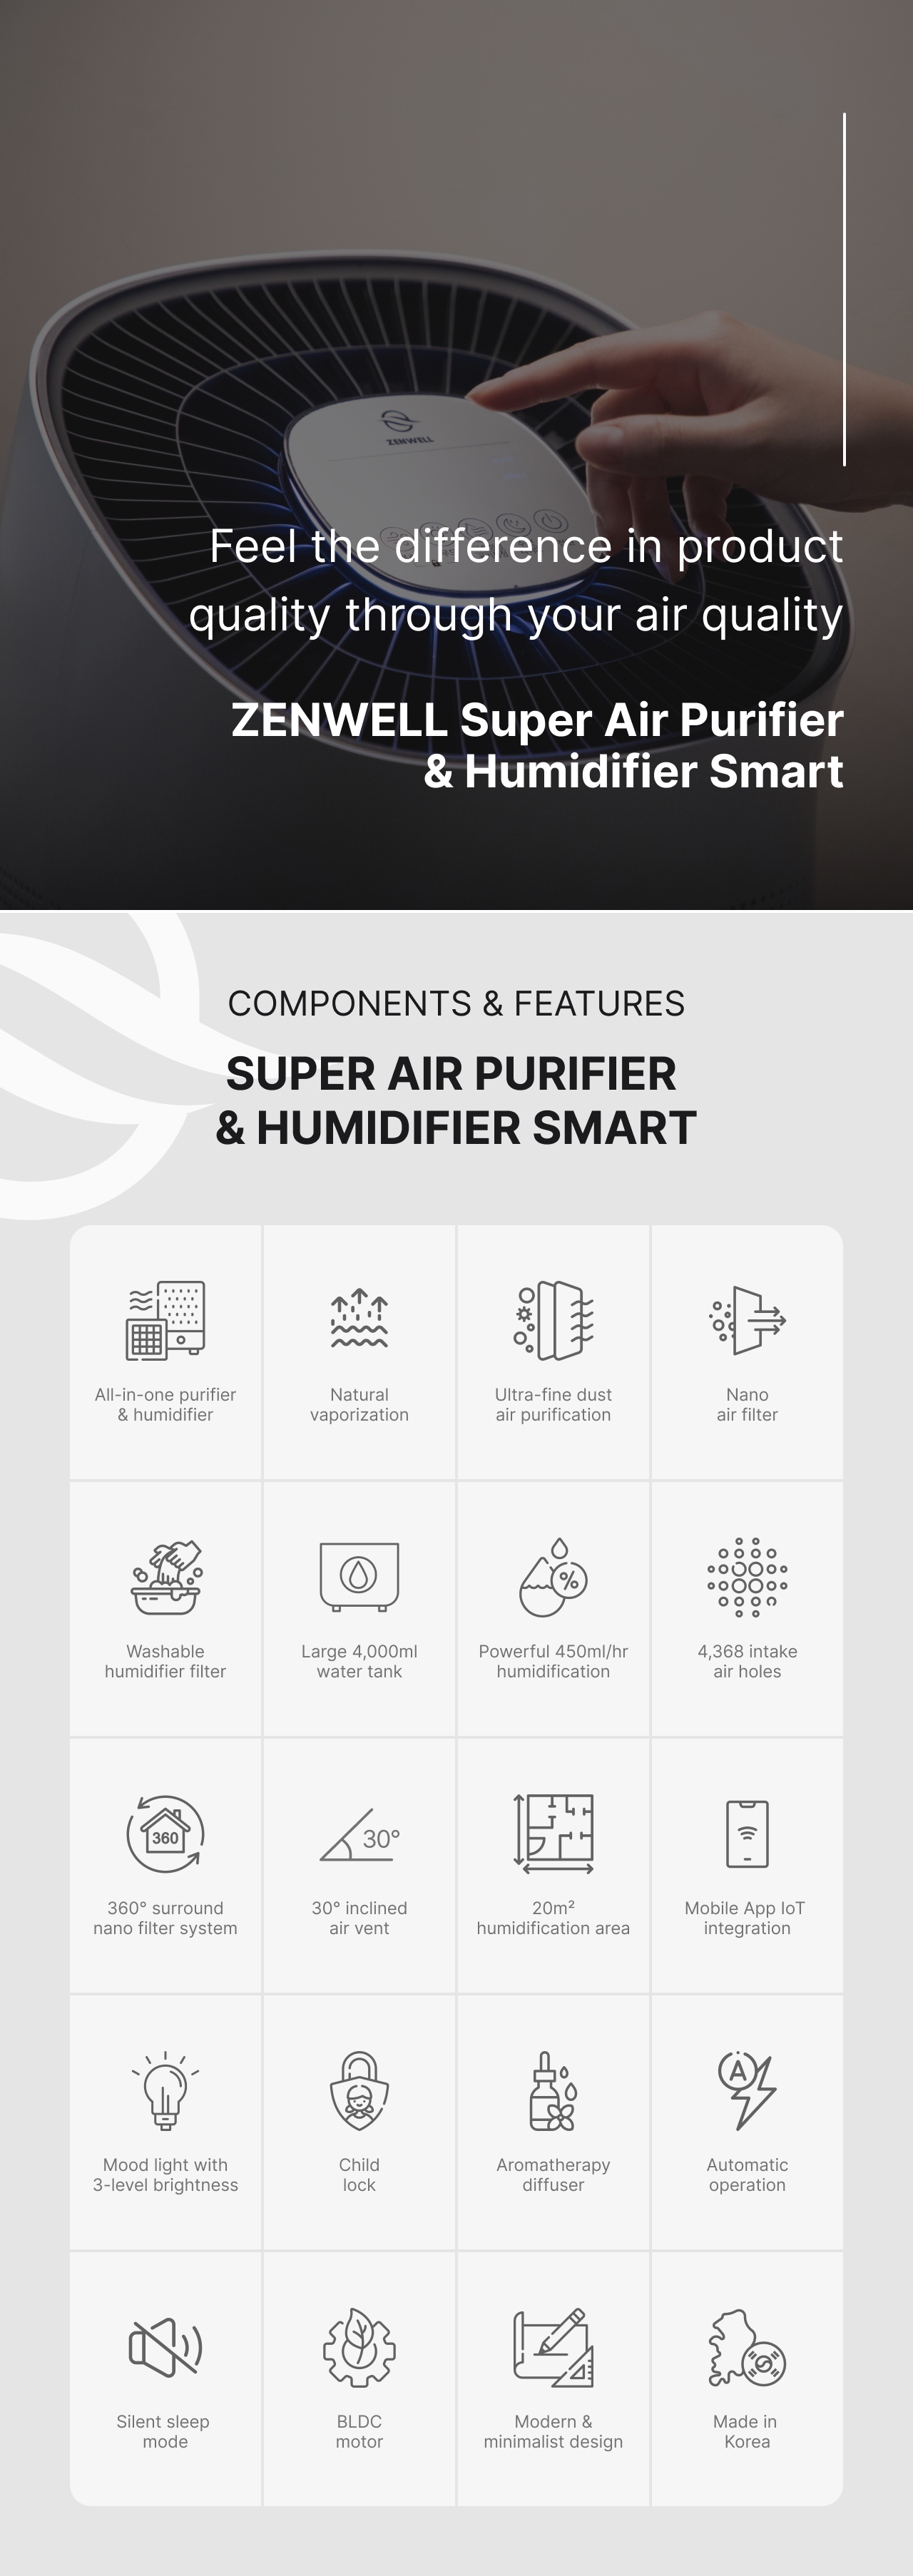 Super Air Purifier and Humidifier Smart feature chart including All-in-one purifier & humidifier, Natural vaporization, Ultra-fine dust air purification, Nano air filter, Washable humidifier filter, 4,000ml water tank, 450ml/hr humidification, 4,368 intake holes, 360° surround nano filter, 30° inclined air vent, 20 square meter humidification area, IoT integration, Mood light, Child lock, Aromatherapy diffuser, Automatic operation, Silent sleep mode, BLDC motor, Modern & minimalist design, and Made in Korea